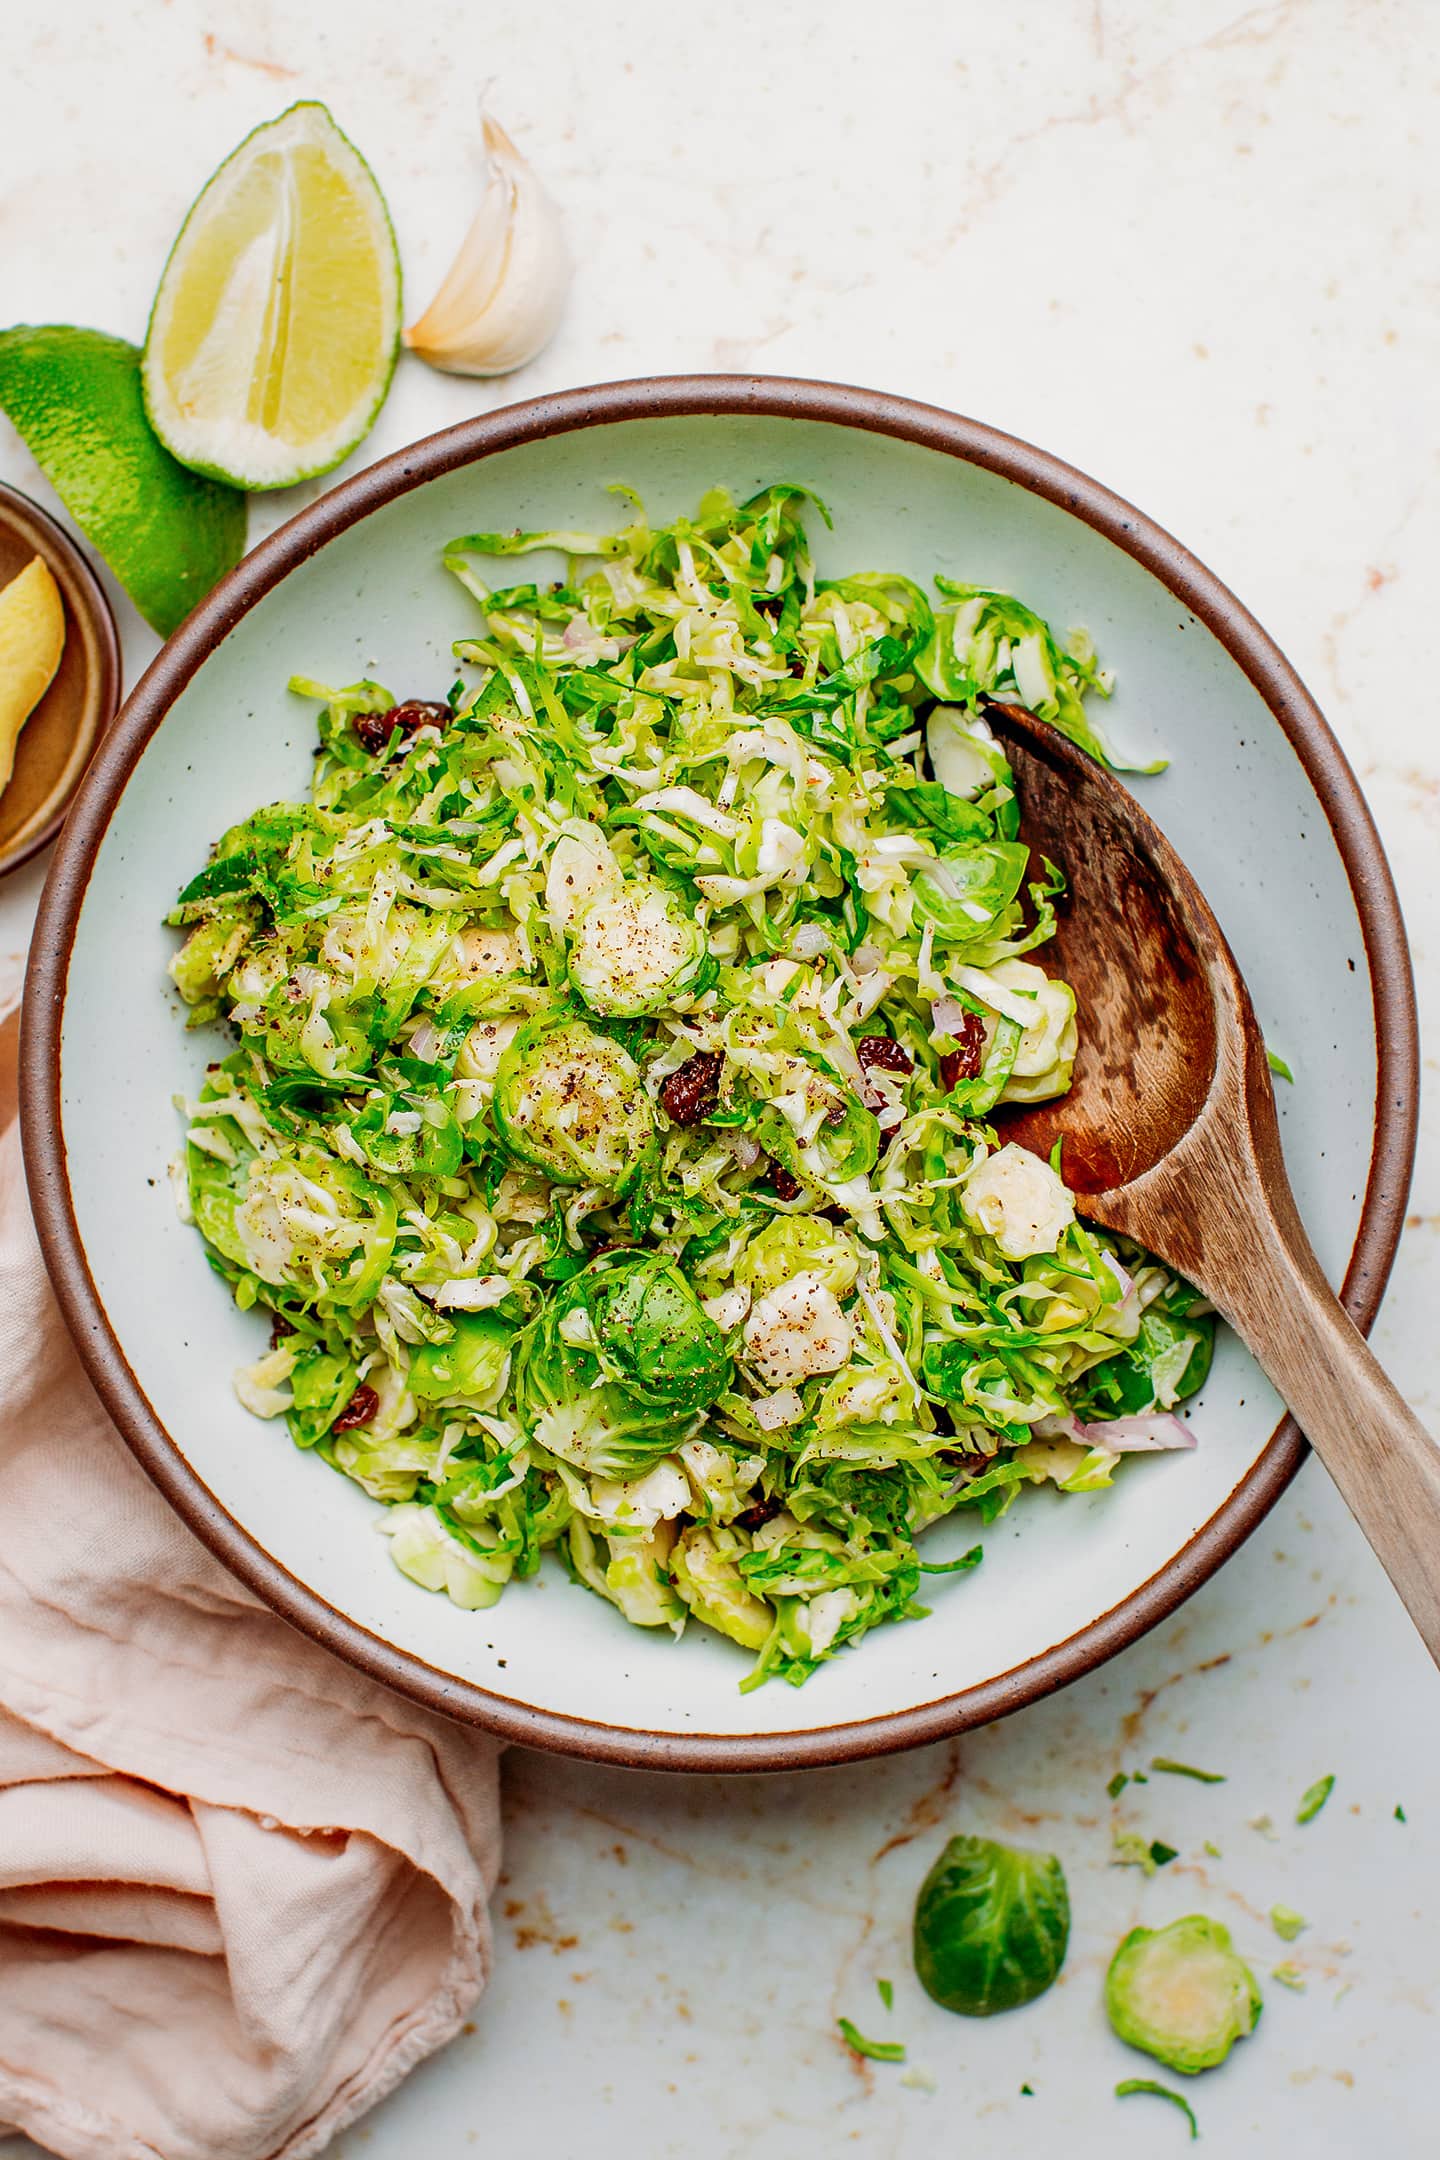 Brussels sprout salad with shallots, ginger, and raisins.